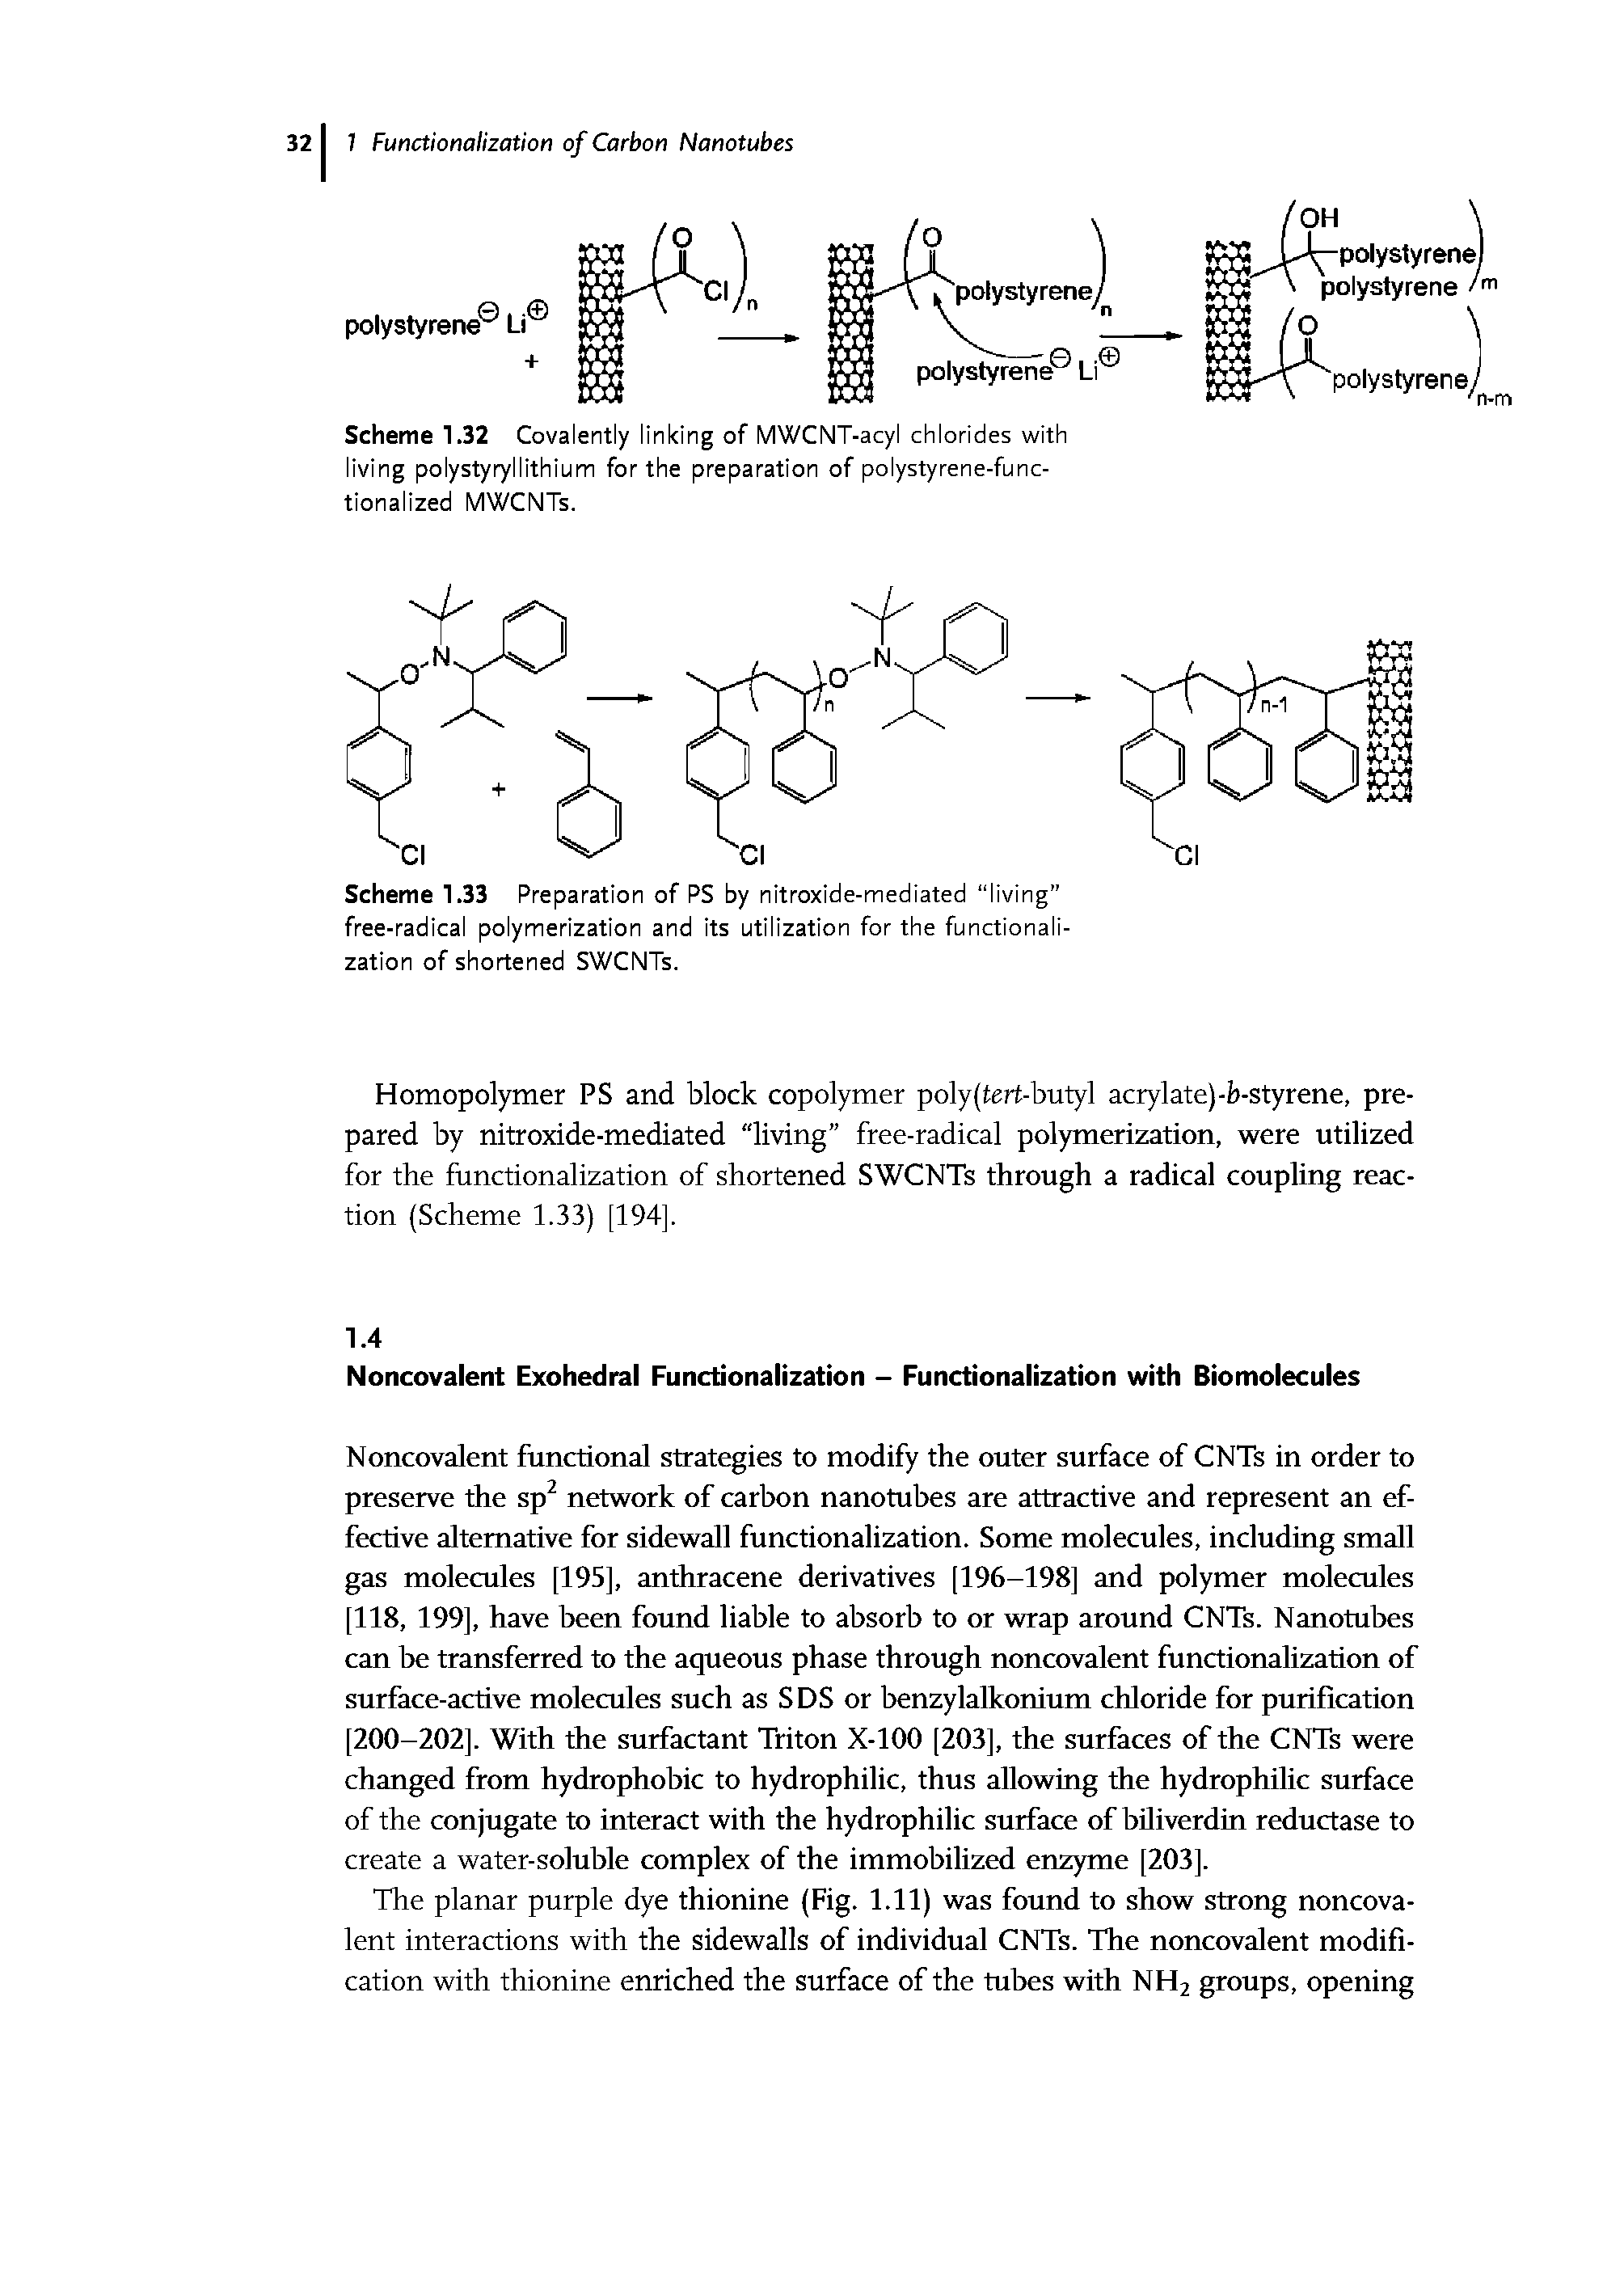 Scheme 1.33 Preparation of PS by nitroxide-mediated living free-radical polymerization and its utilization for the functionalization of shortened SWCNTs.